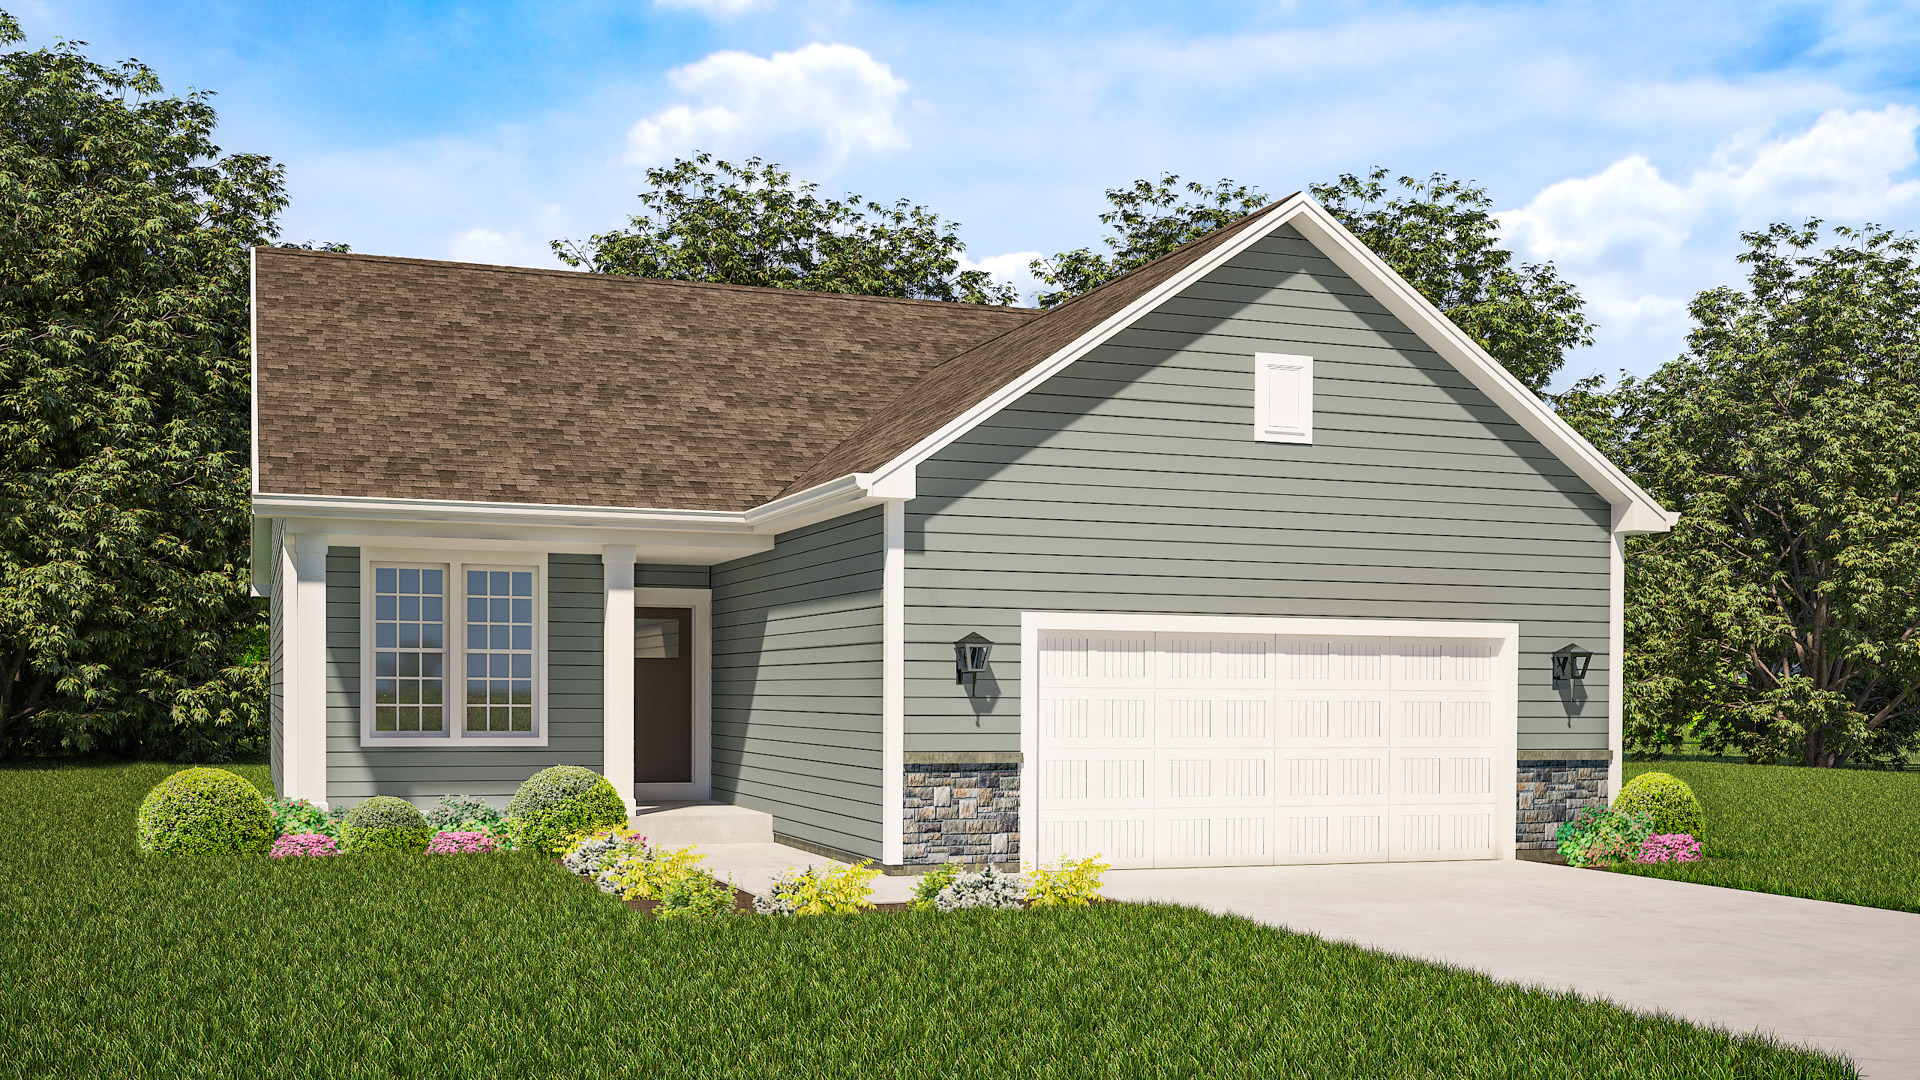 The Neenah Home Model Rendering Stepping Stone Homes Wisconsin